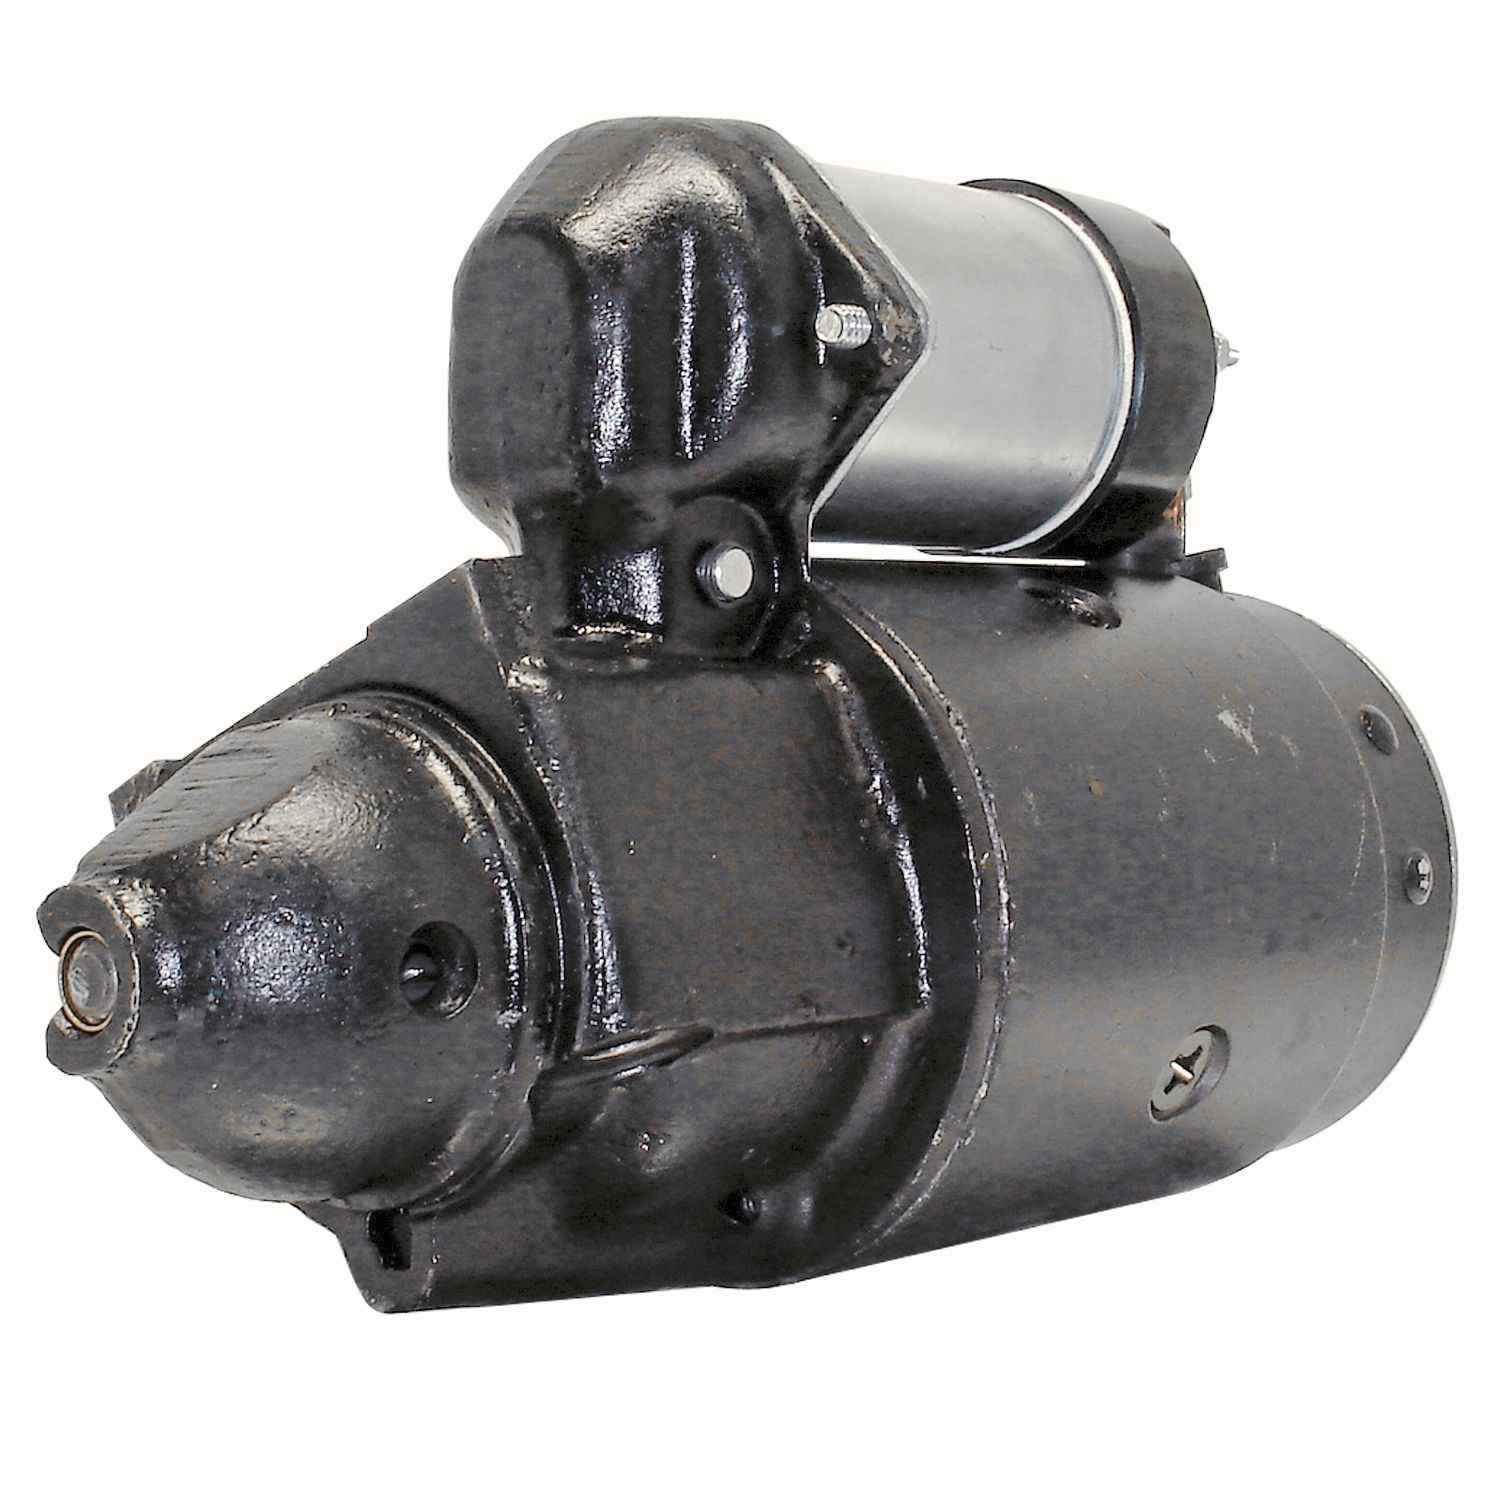 ACDELCO GOLD/PROFESSIONAL - Reman Starter Motor - DCC 336-1836